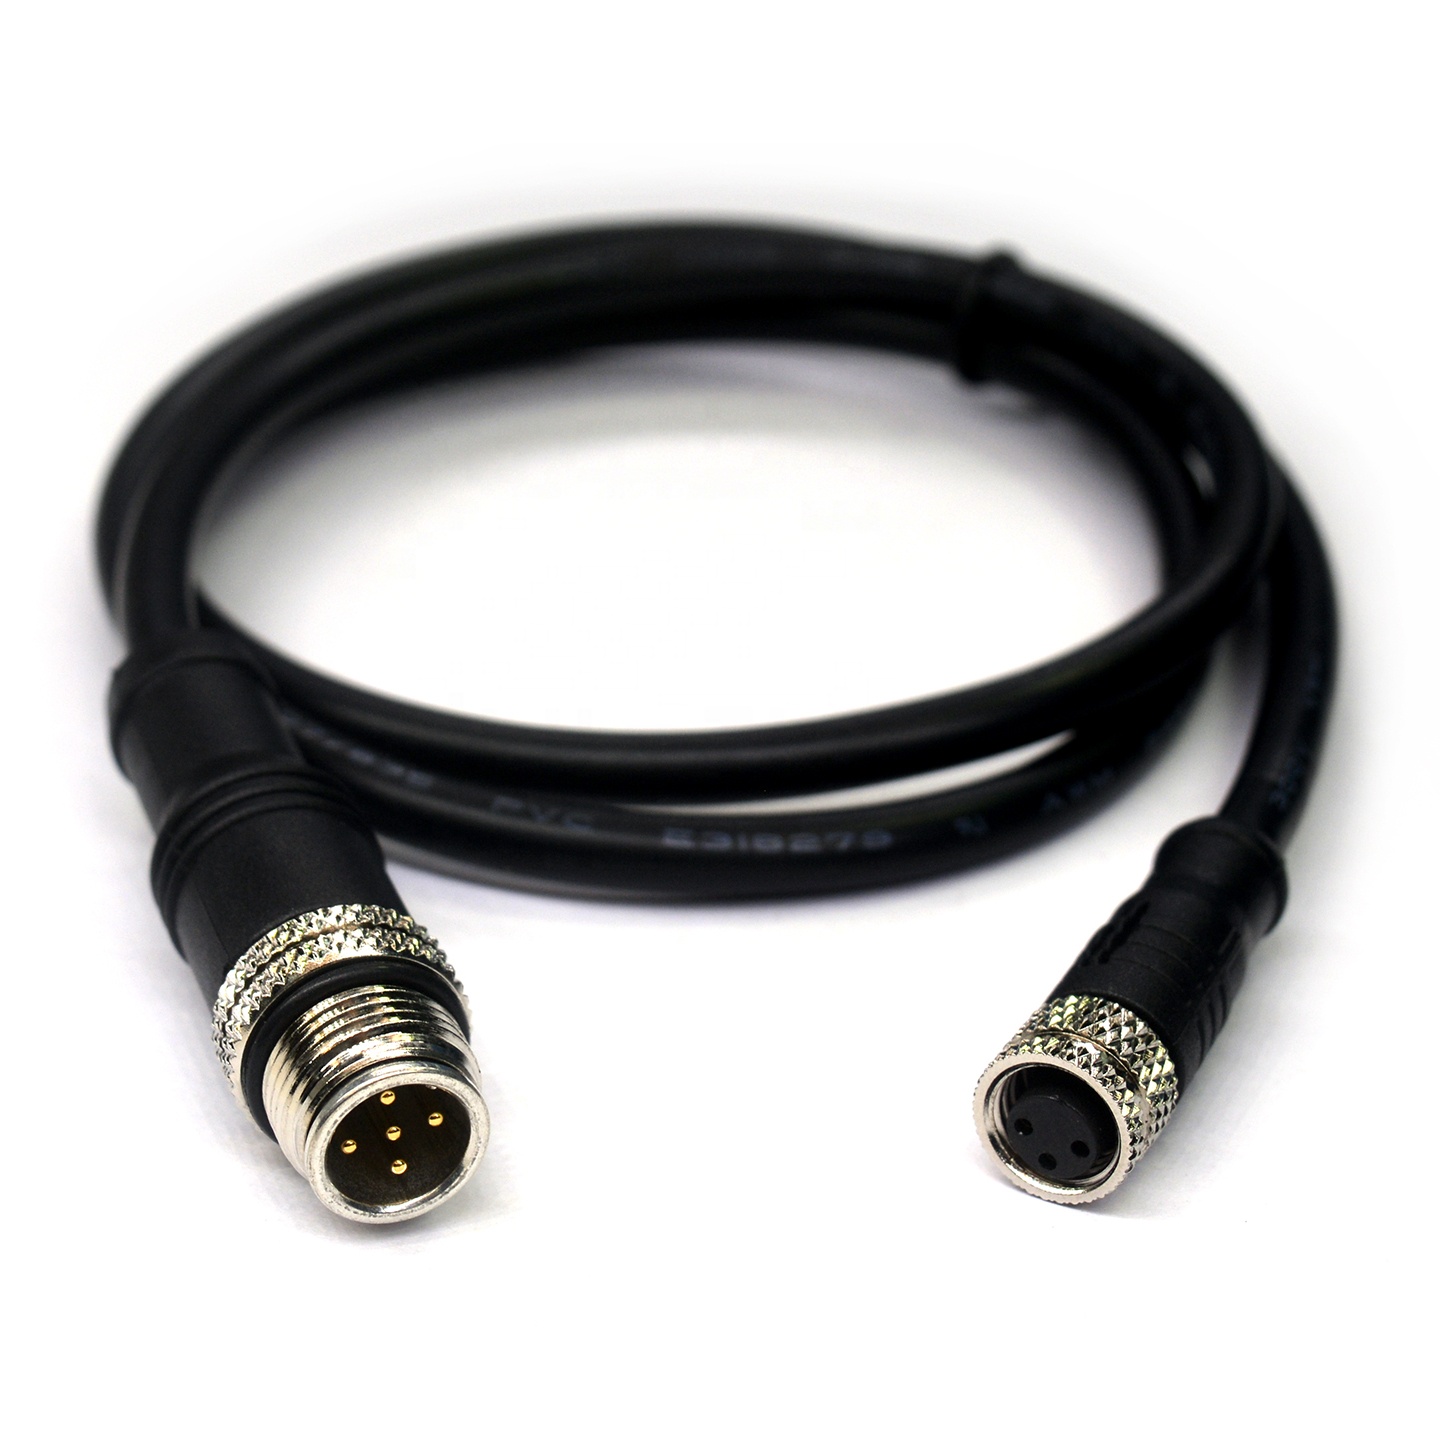 M12 A-code 5 pin male to M8 A-code 3 pin female cable for fork light-barrier power supply